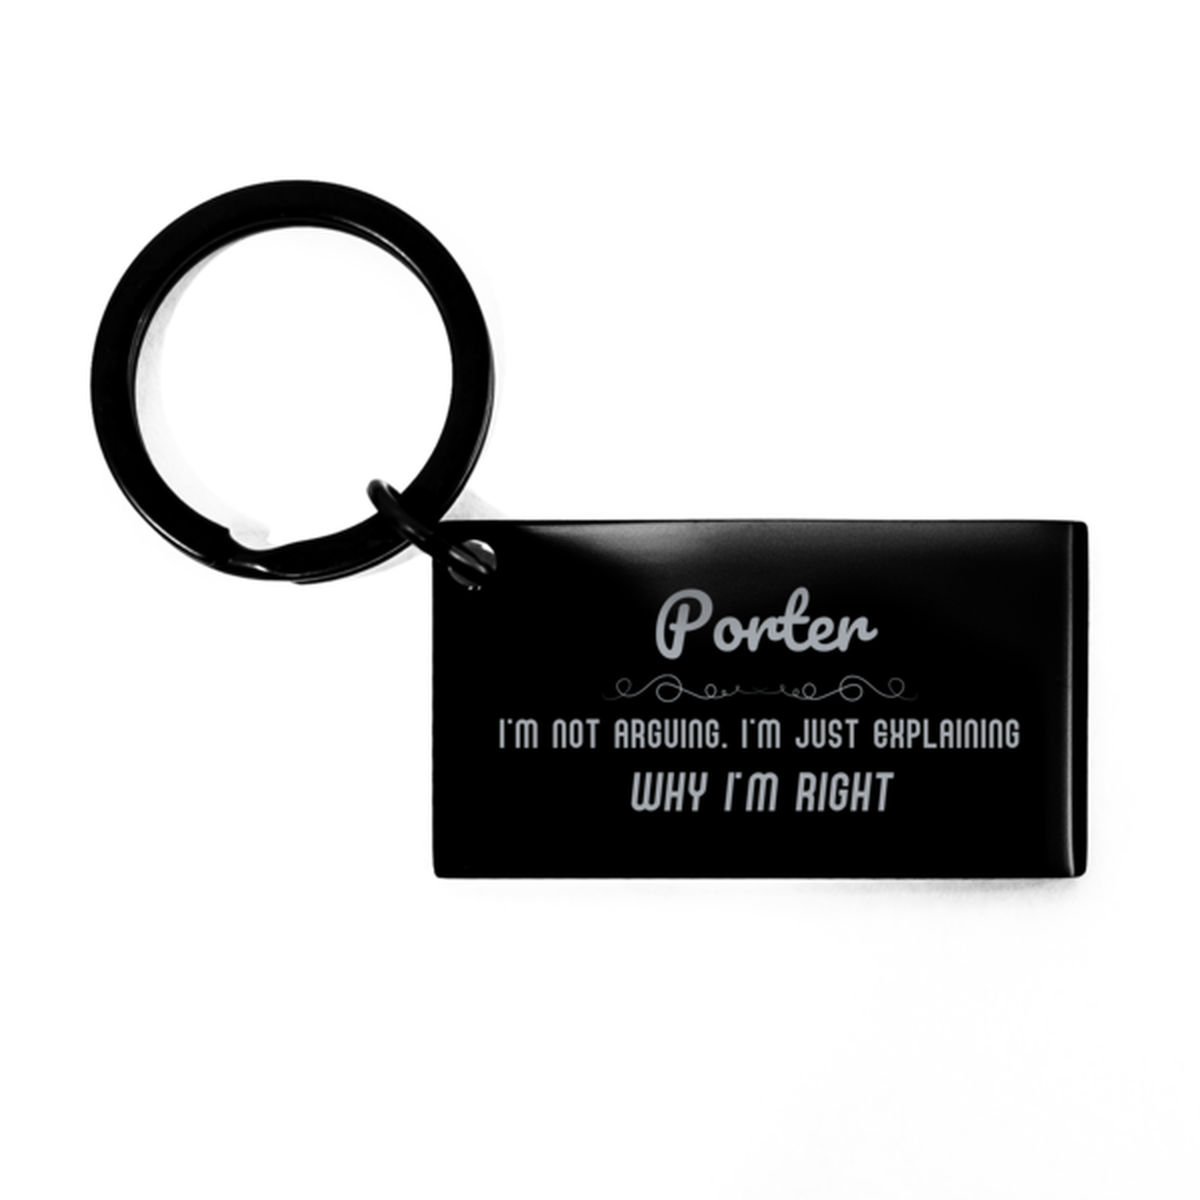 Porter I'm not Arguing. I'm Just Explaining Why I'm RIGHT Keychain, Funny Saying Quote Porter Gifts For Porter Graduation Birthday Christmas Gifts for Men Women Coworker